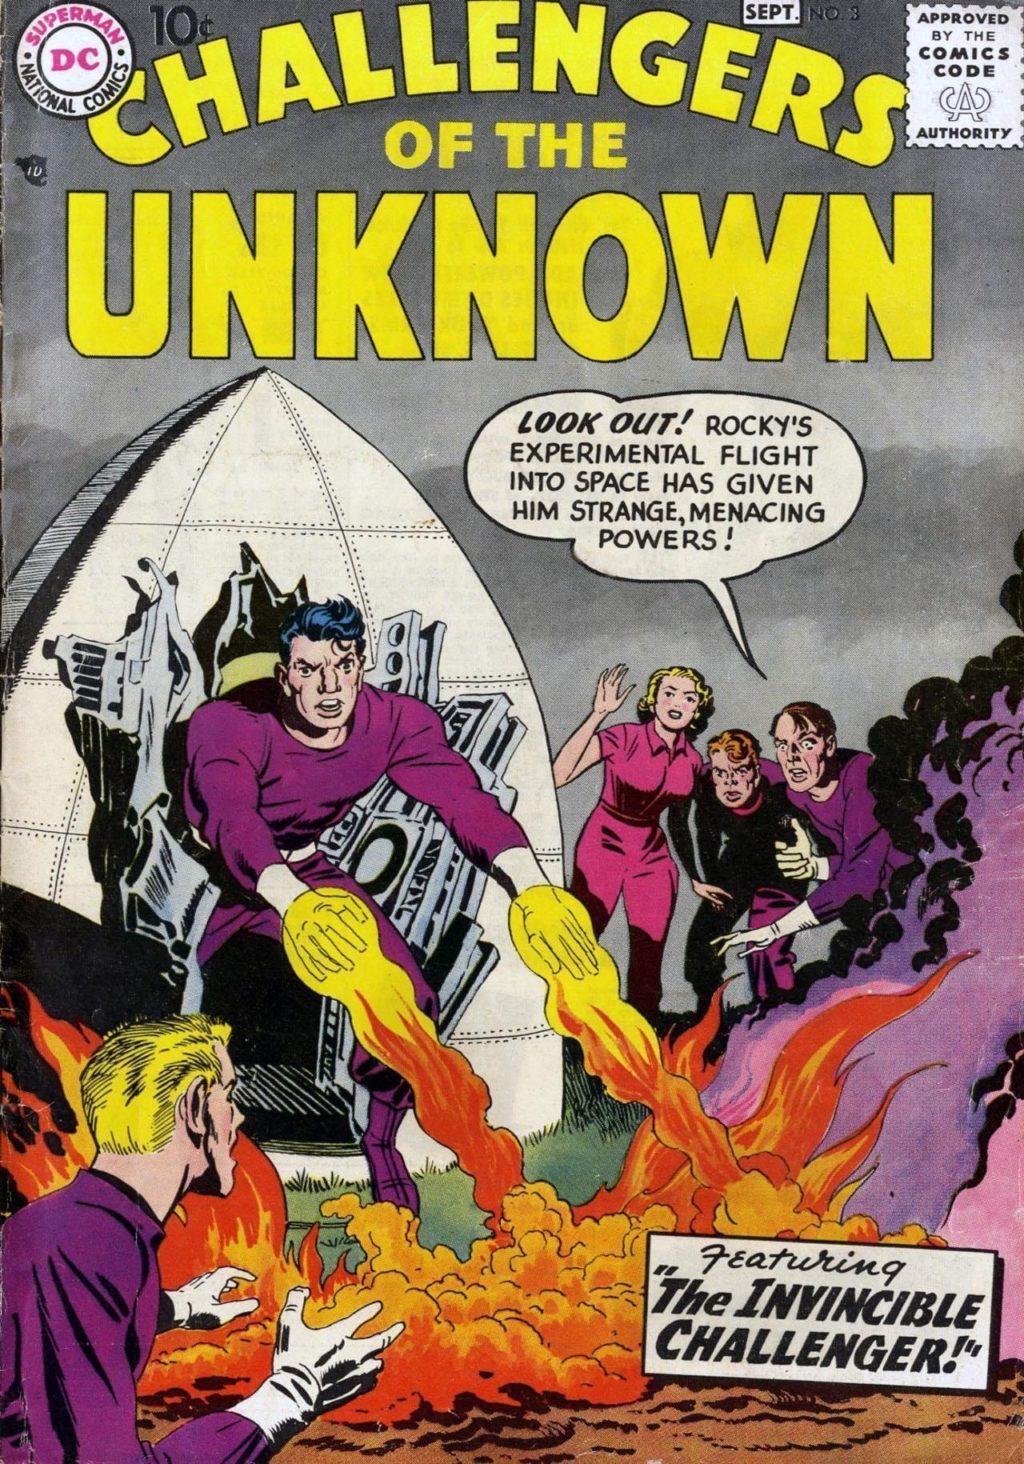 1958Challengers-of-the-Unknown-V1-3-Page-1.jpg